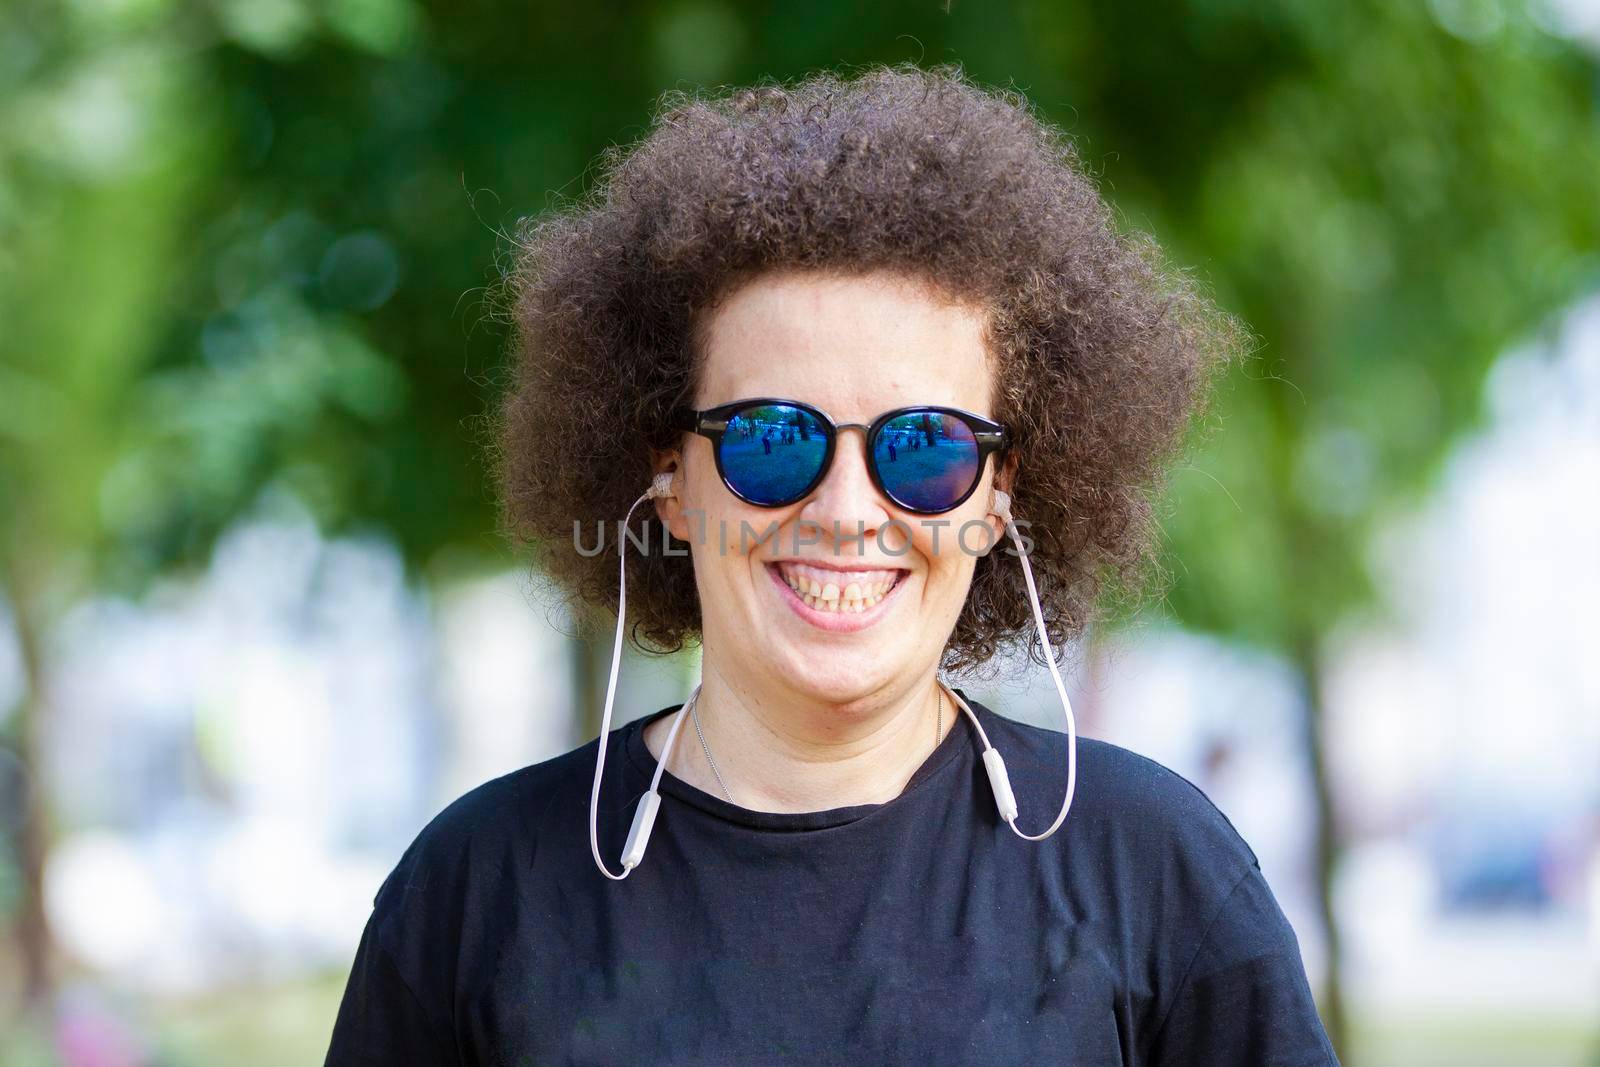 Curly girl in sunglasses looks at the camera and smiles.